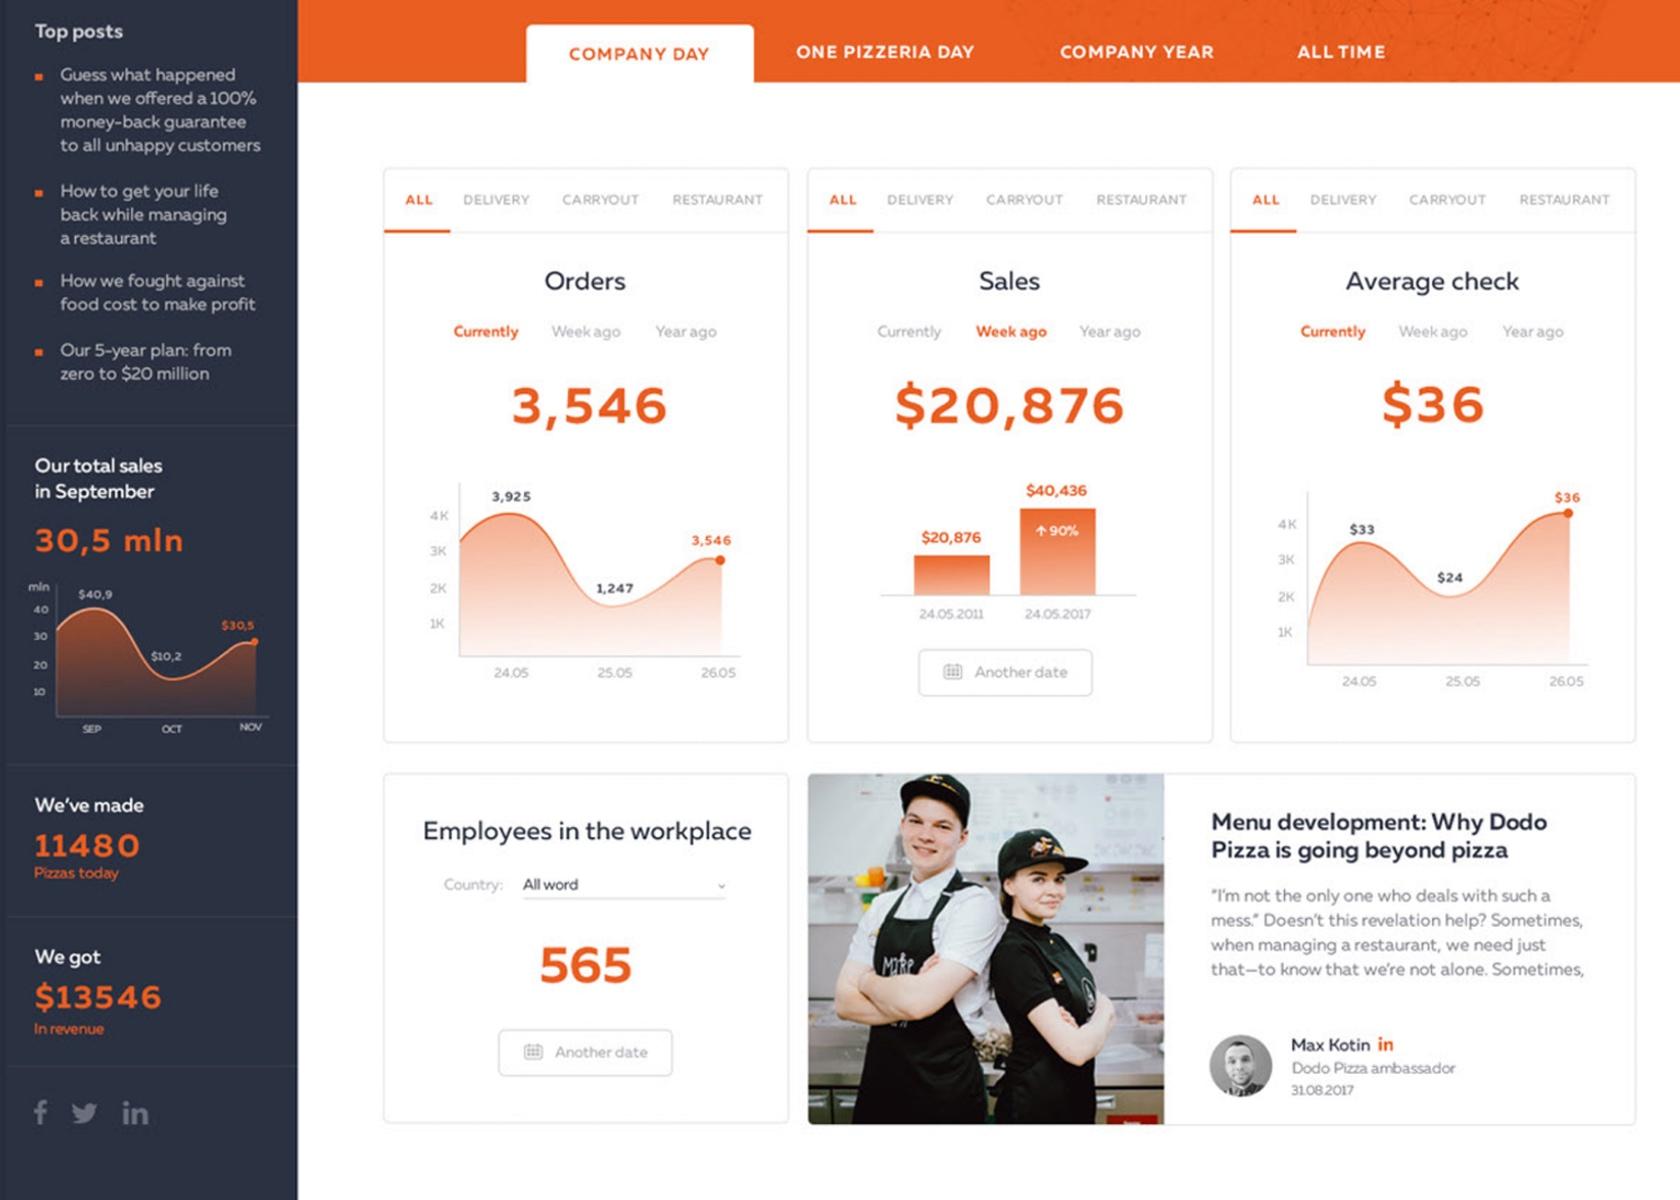 A dashboard design best practice is to use color to enhance the meaning of the information.